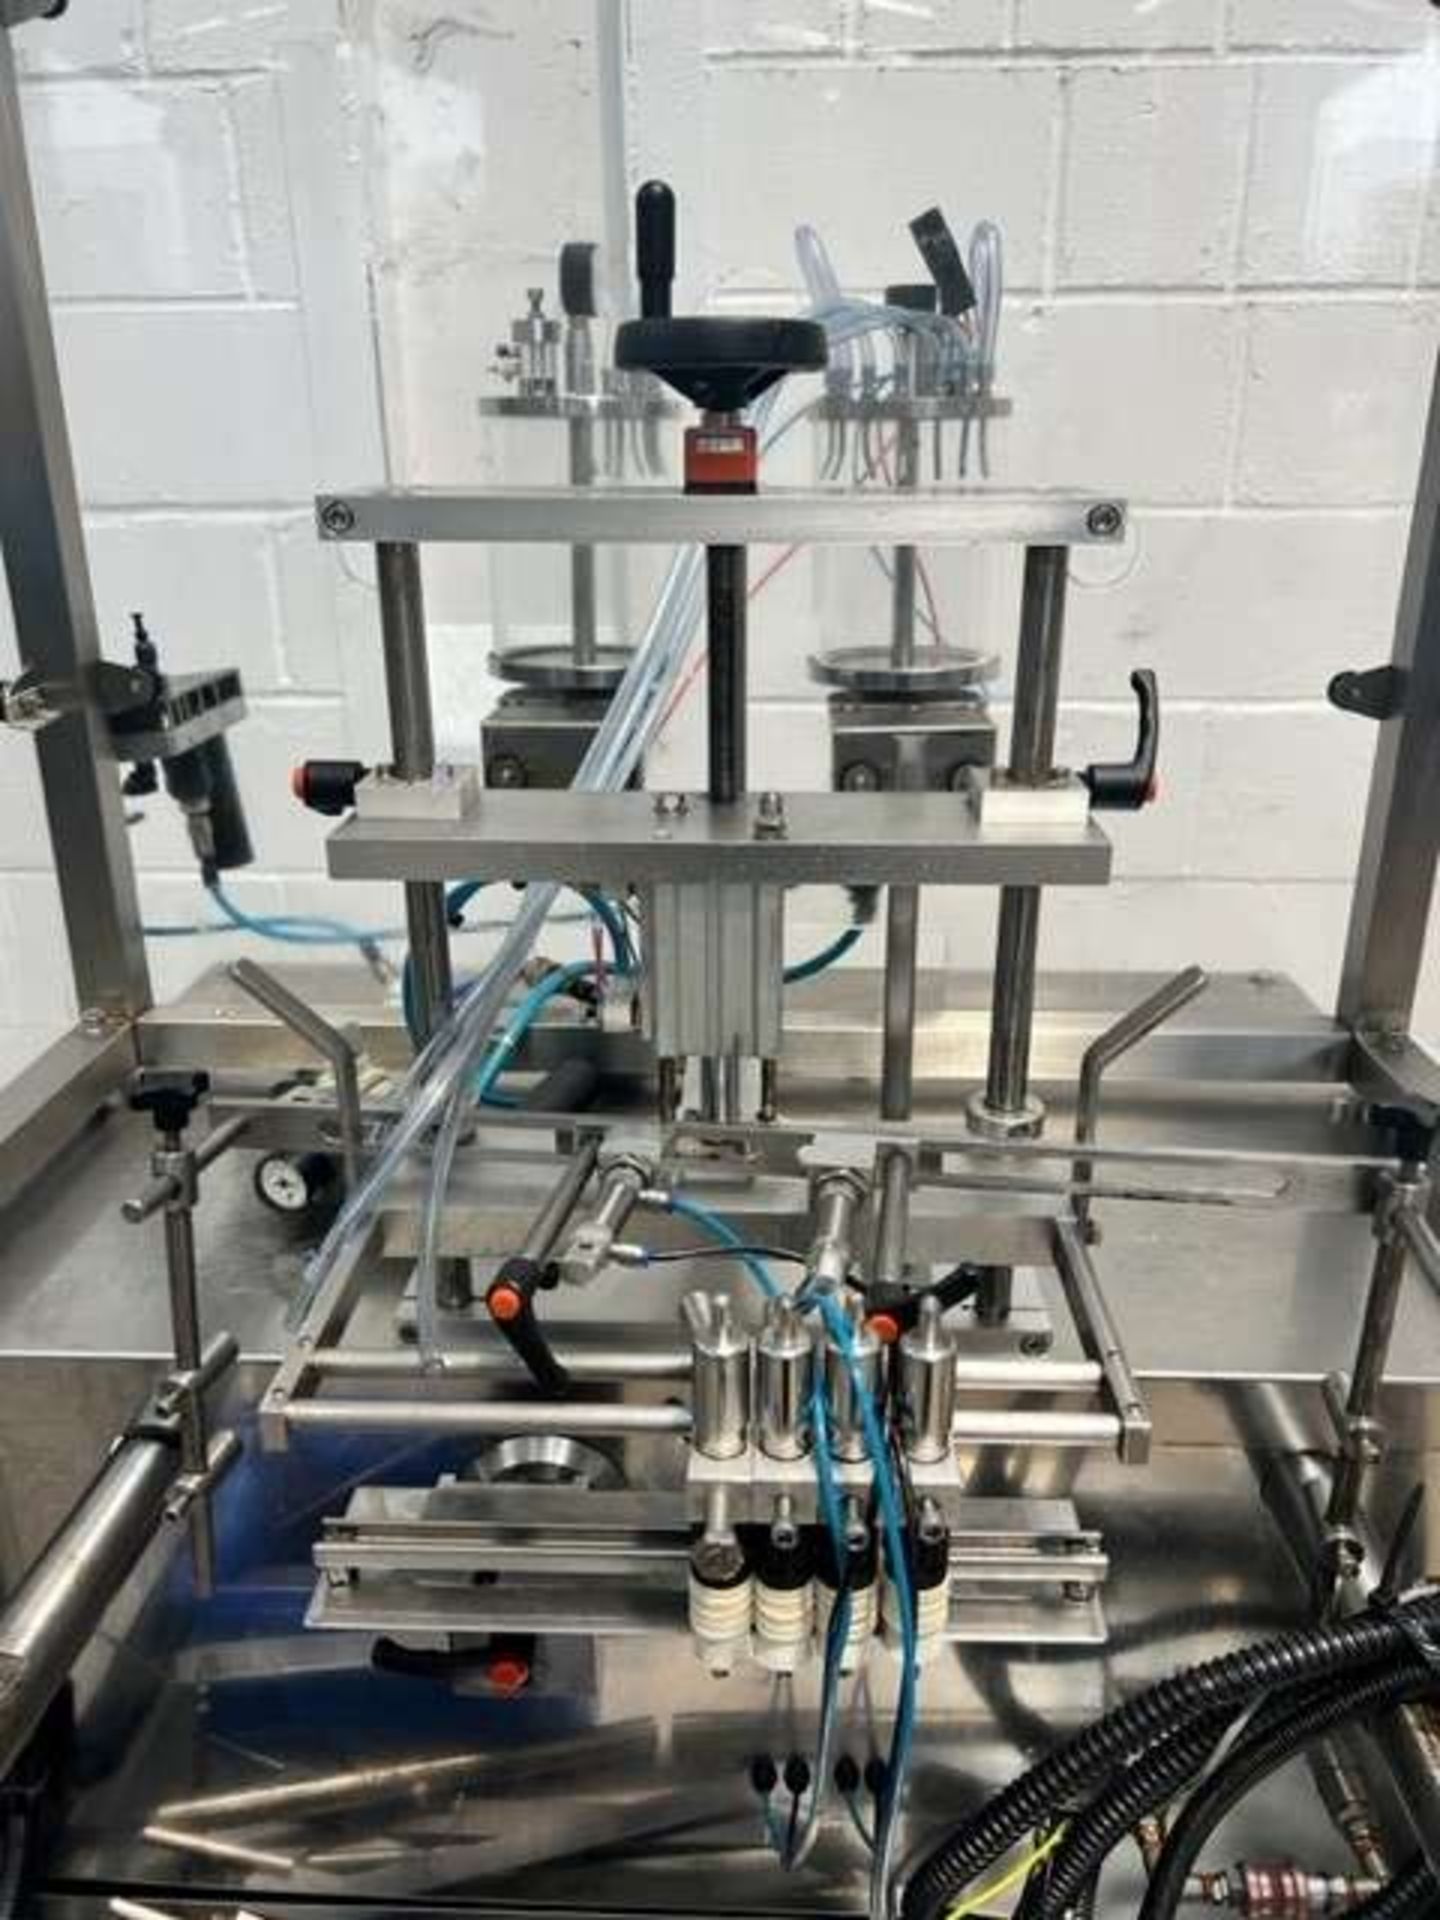 Stainless Steel 4-Head Vacuum Filler for Smaller Volumes - Image 8 of 12